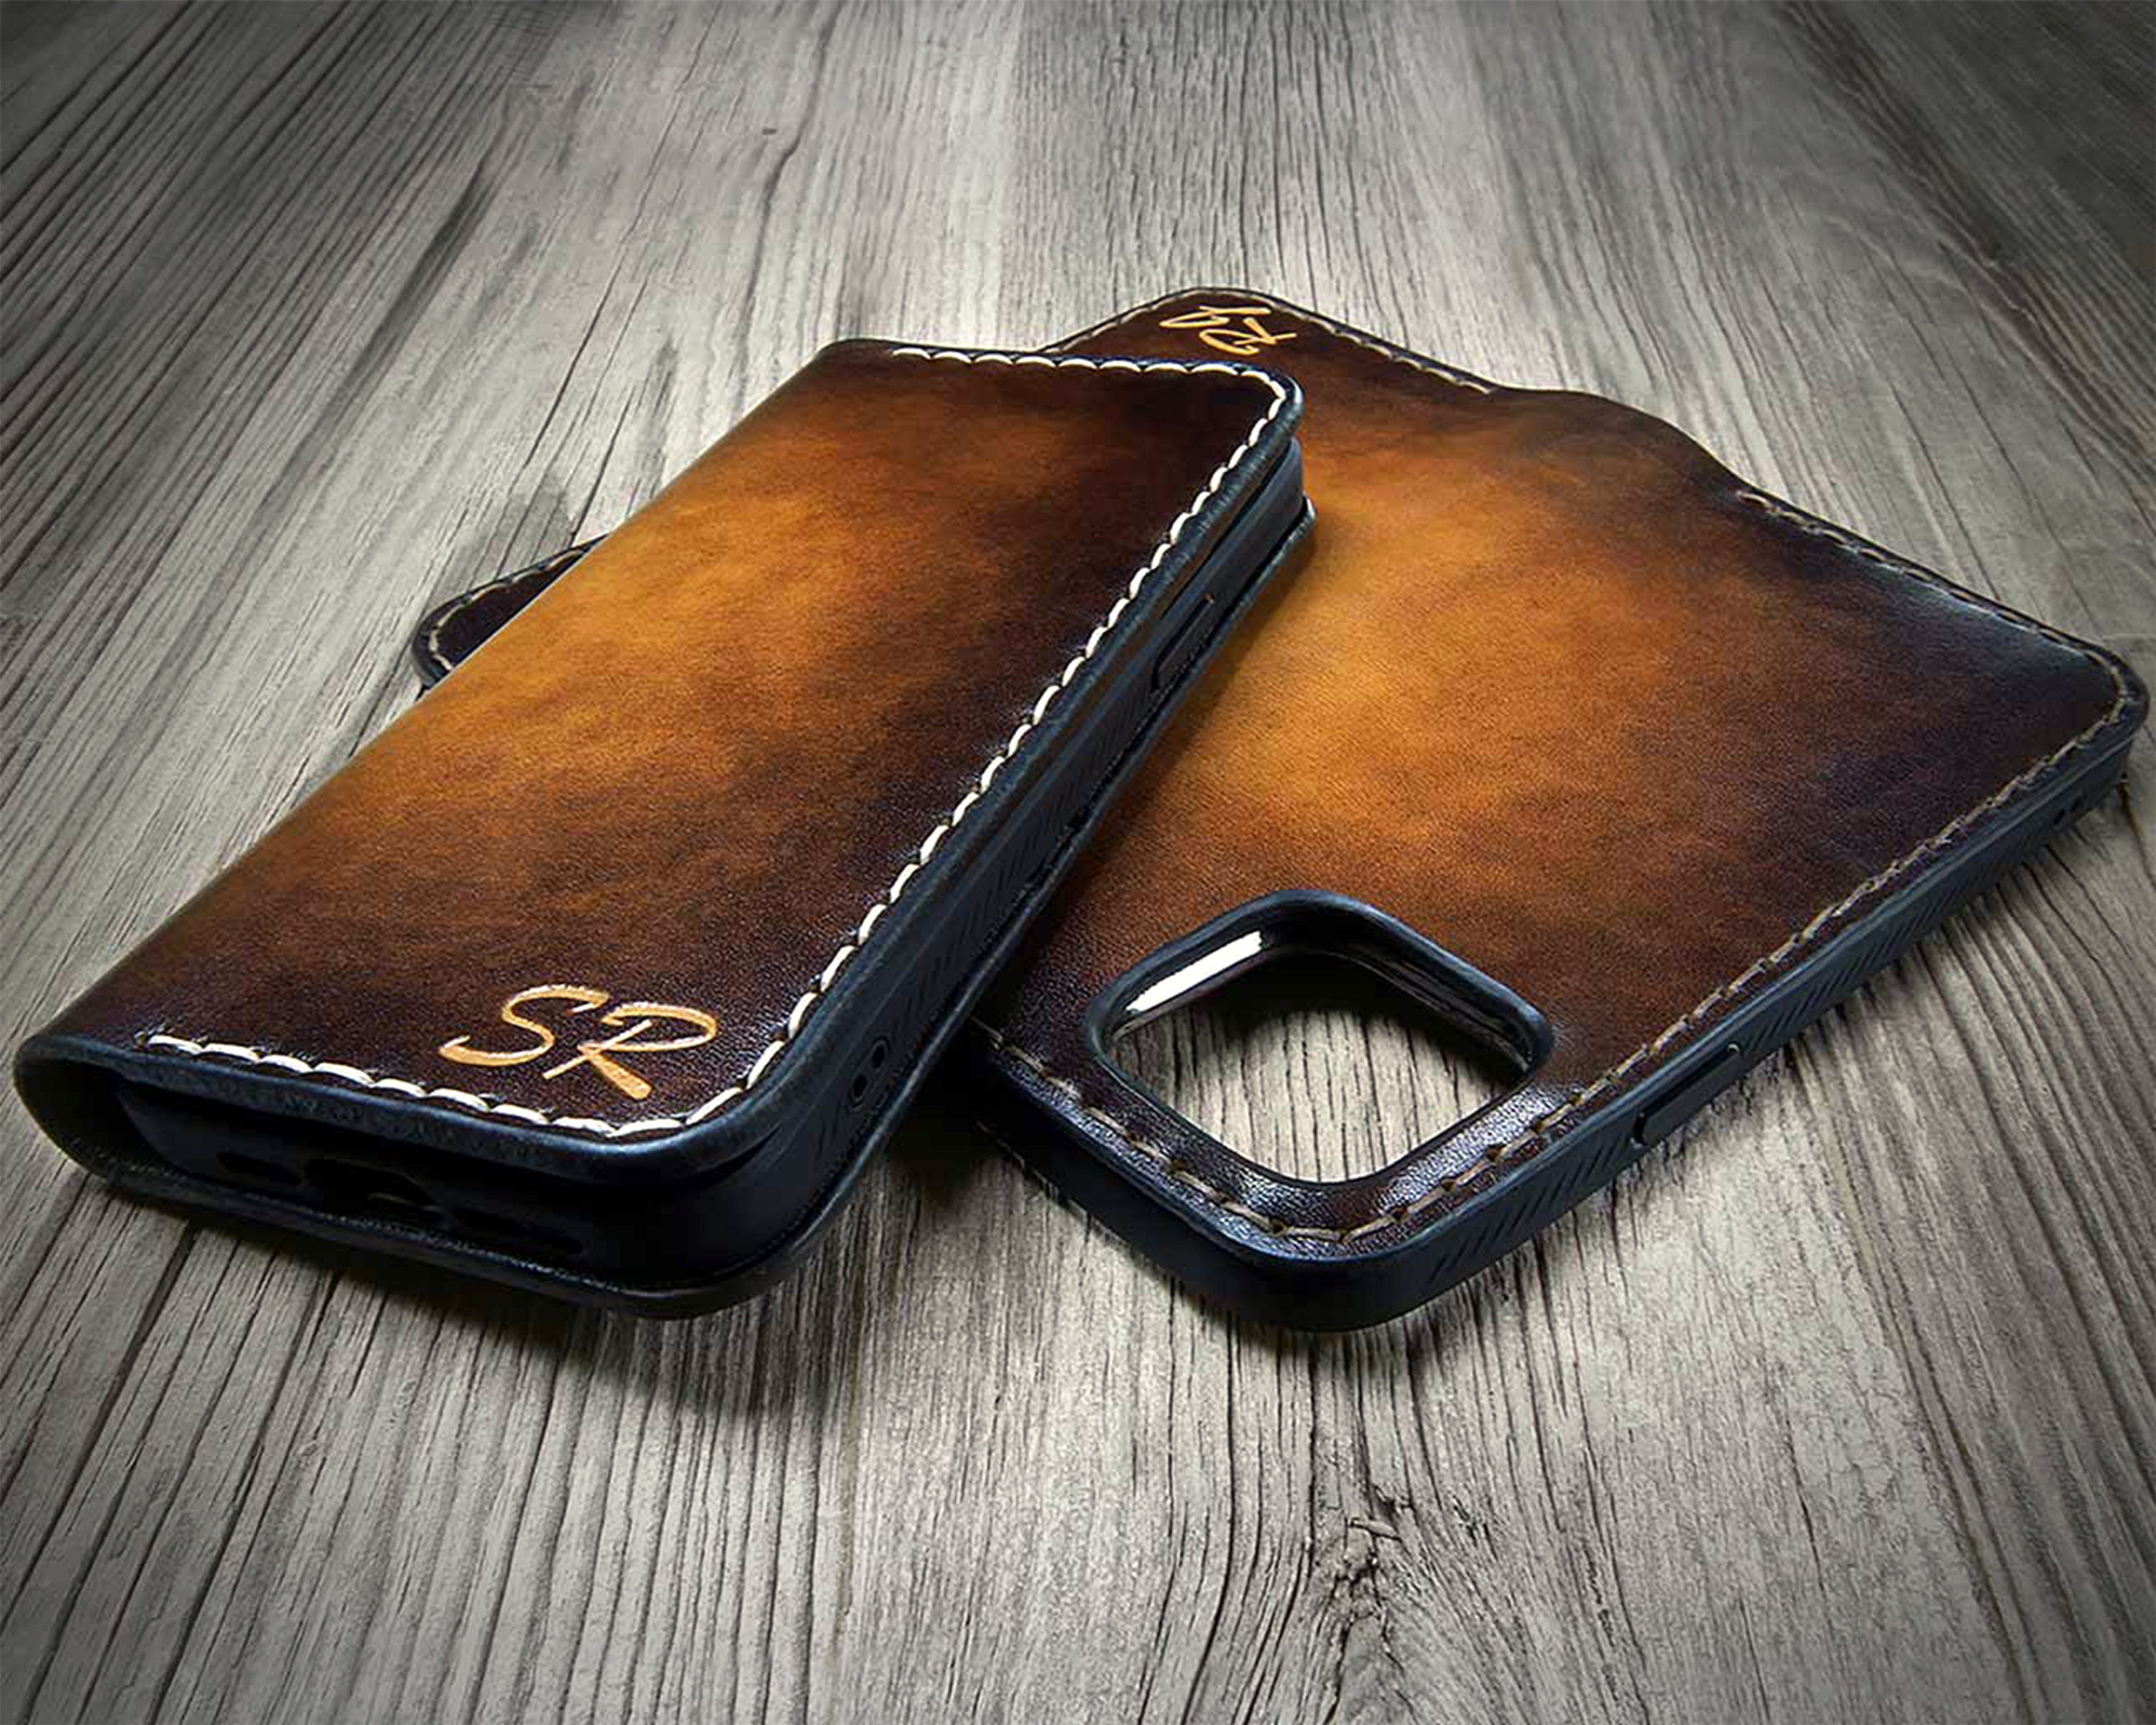 Book Style Flip Genuine Leather Wallet Case Cover For iPhone 15/14